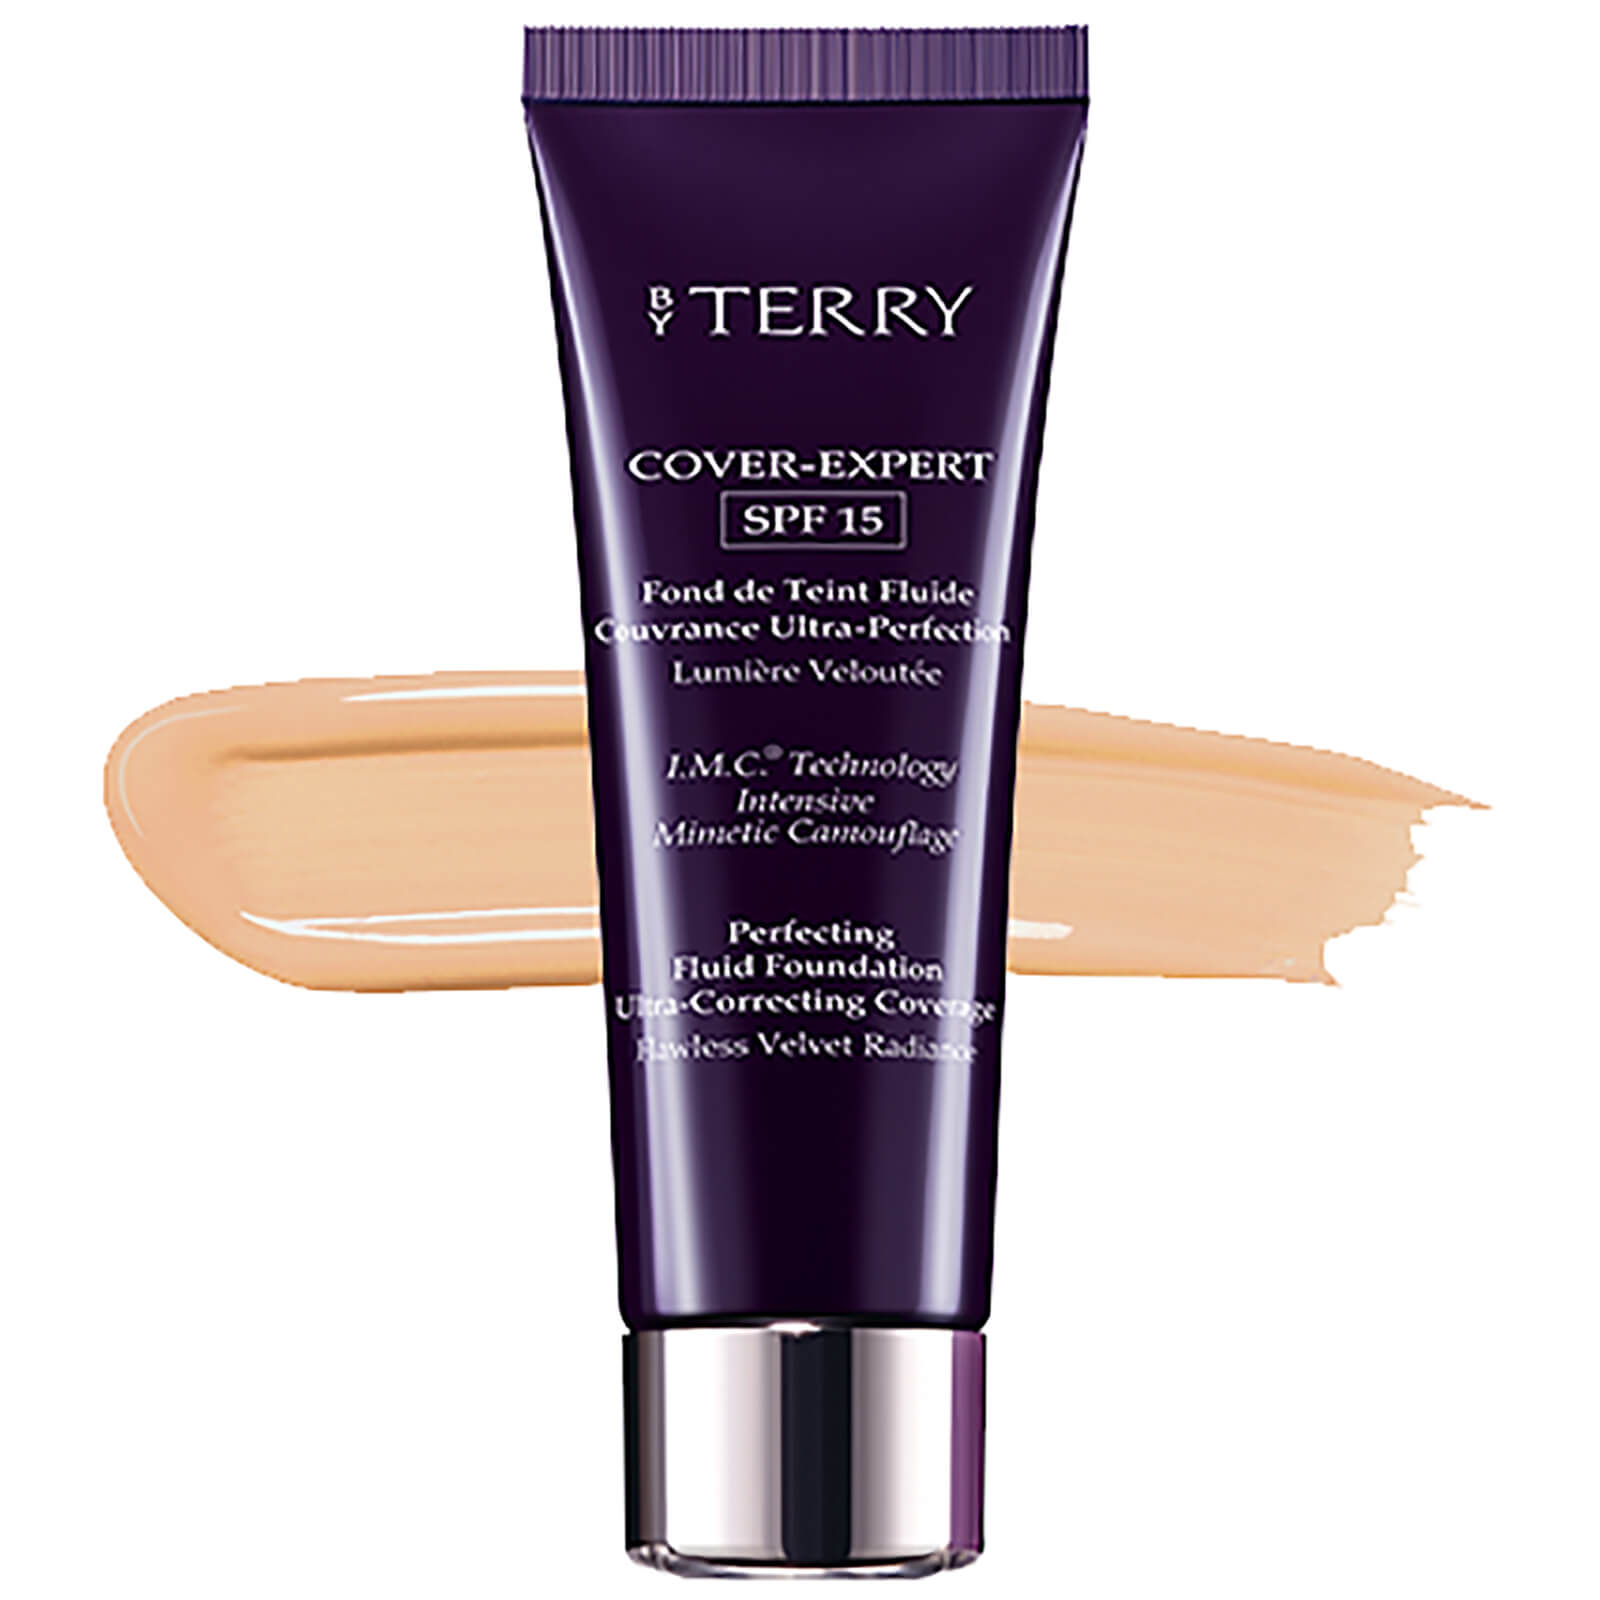 By Terry Cover-Expert Foundation SPF15 35ml (Various Shades) - 2 7. Vanilla Beige